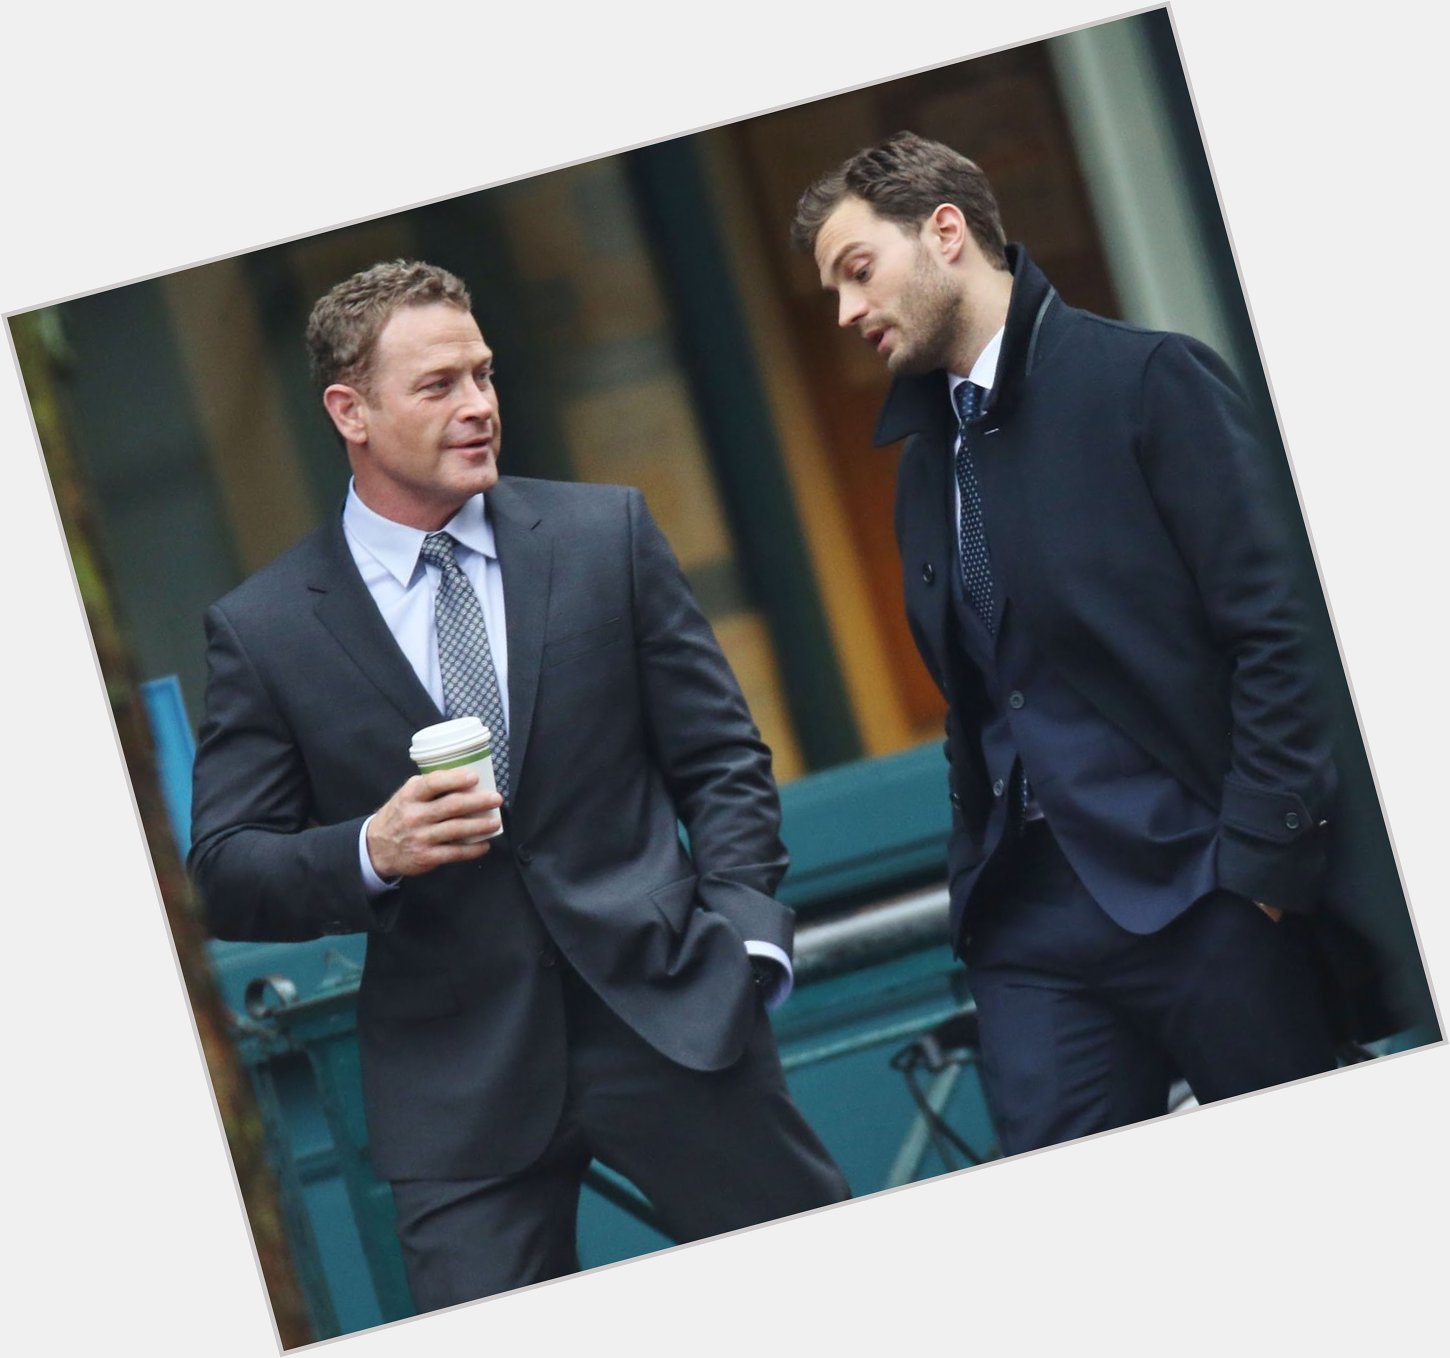 Wishing a very Happy 49th Birthday to actor Max Martini, shown here with Jamie.  